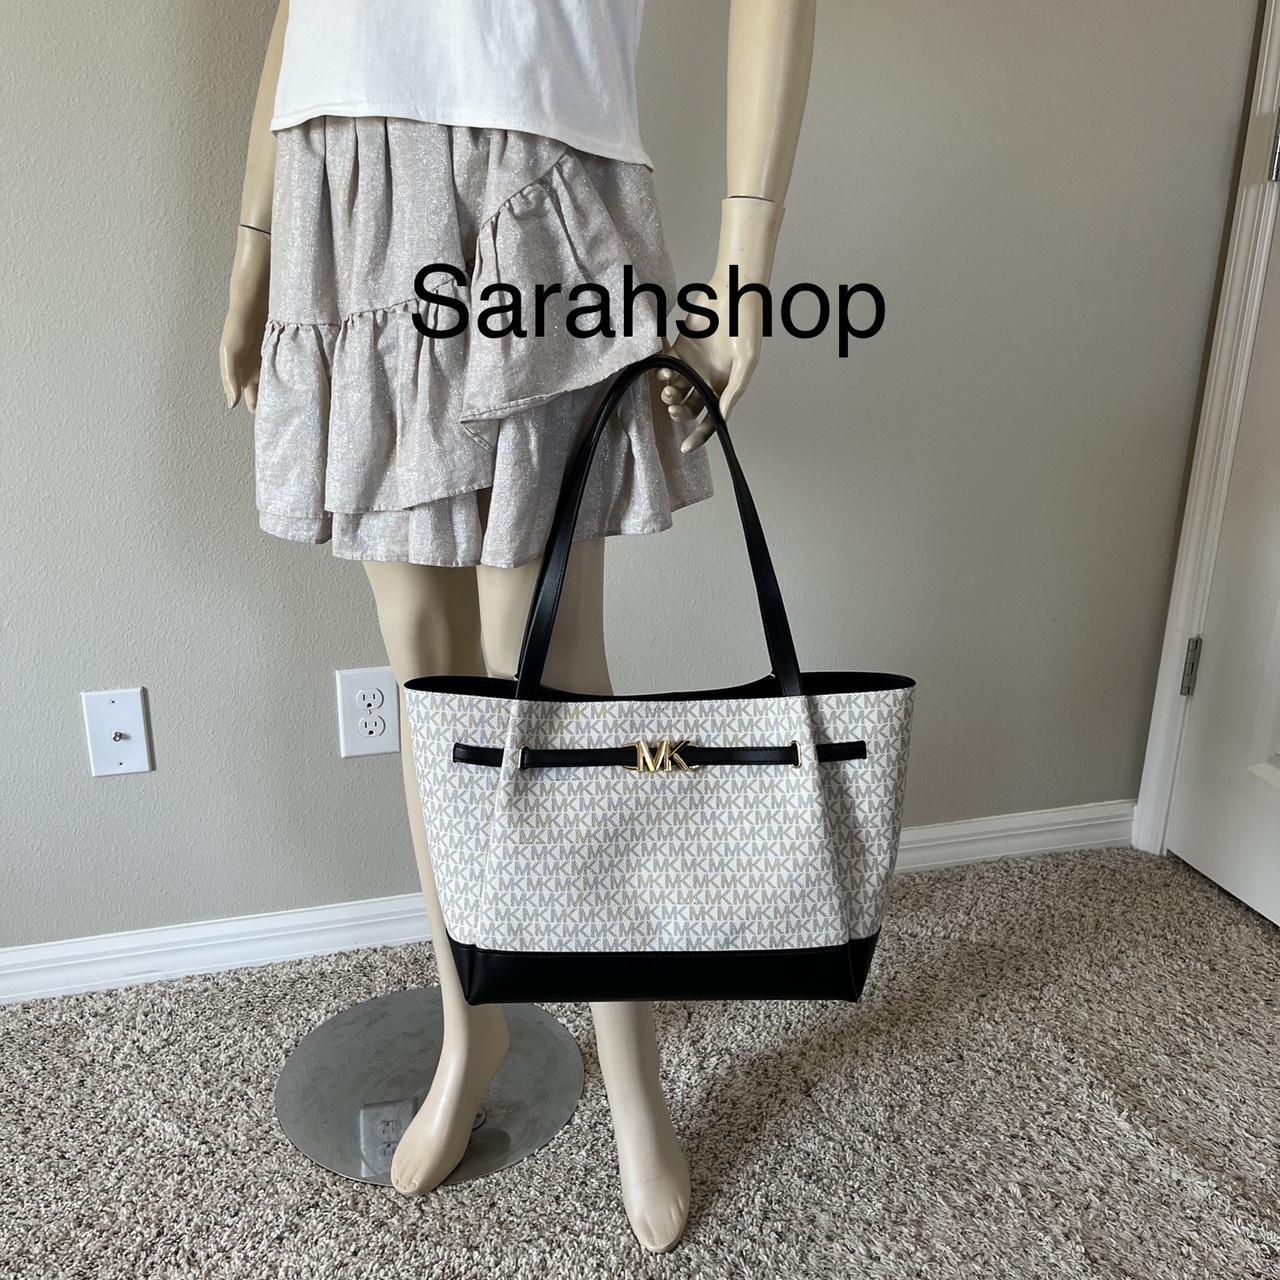 michael kors pink and white canvas tote bag. never - Depop